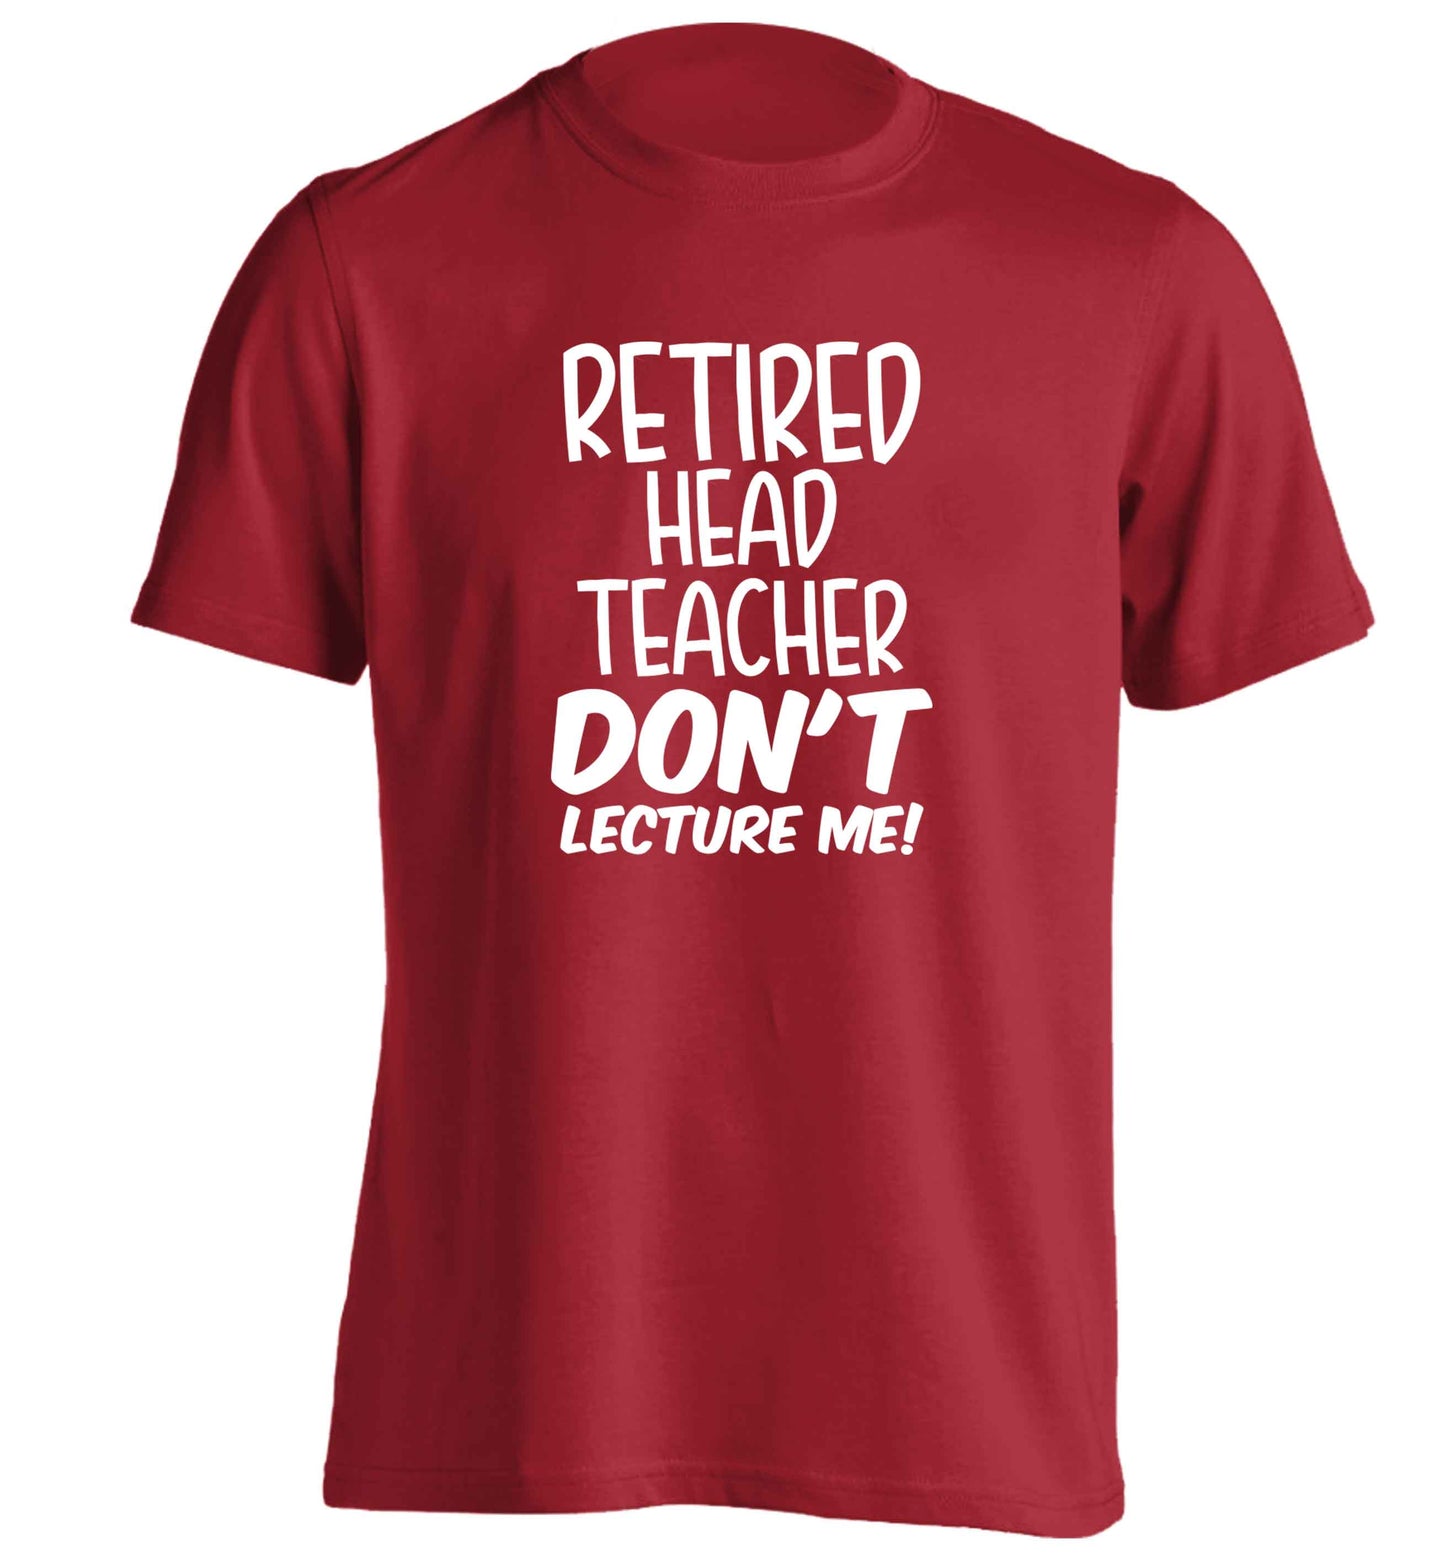 Retired head teacher don't lecture me! adults unisex red Tshirt 2XL